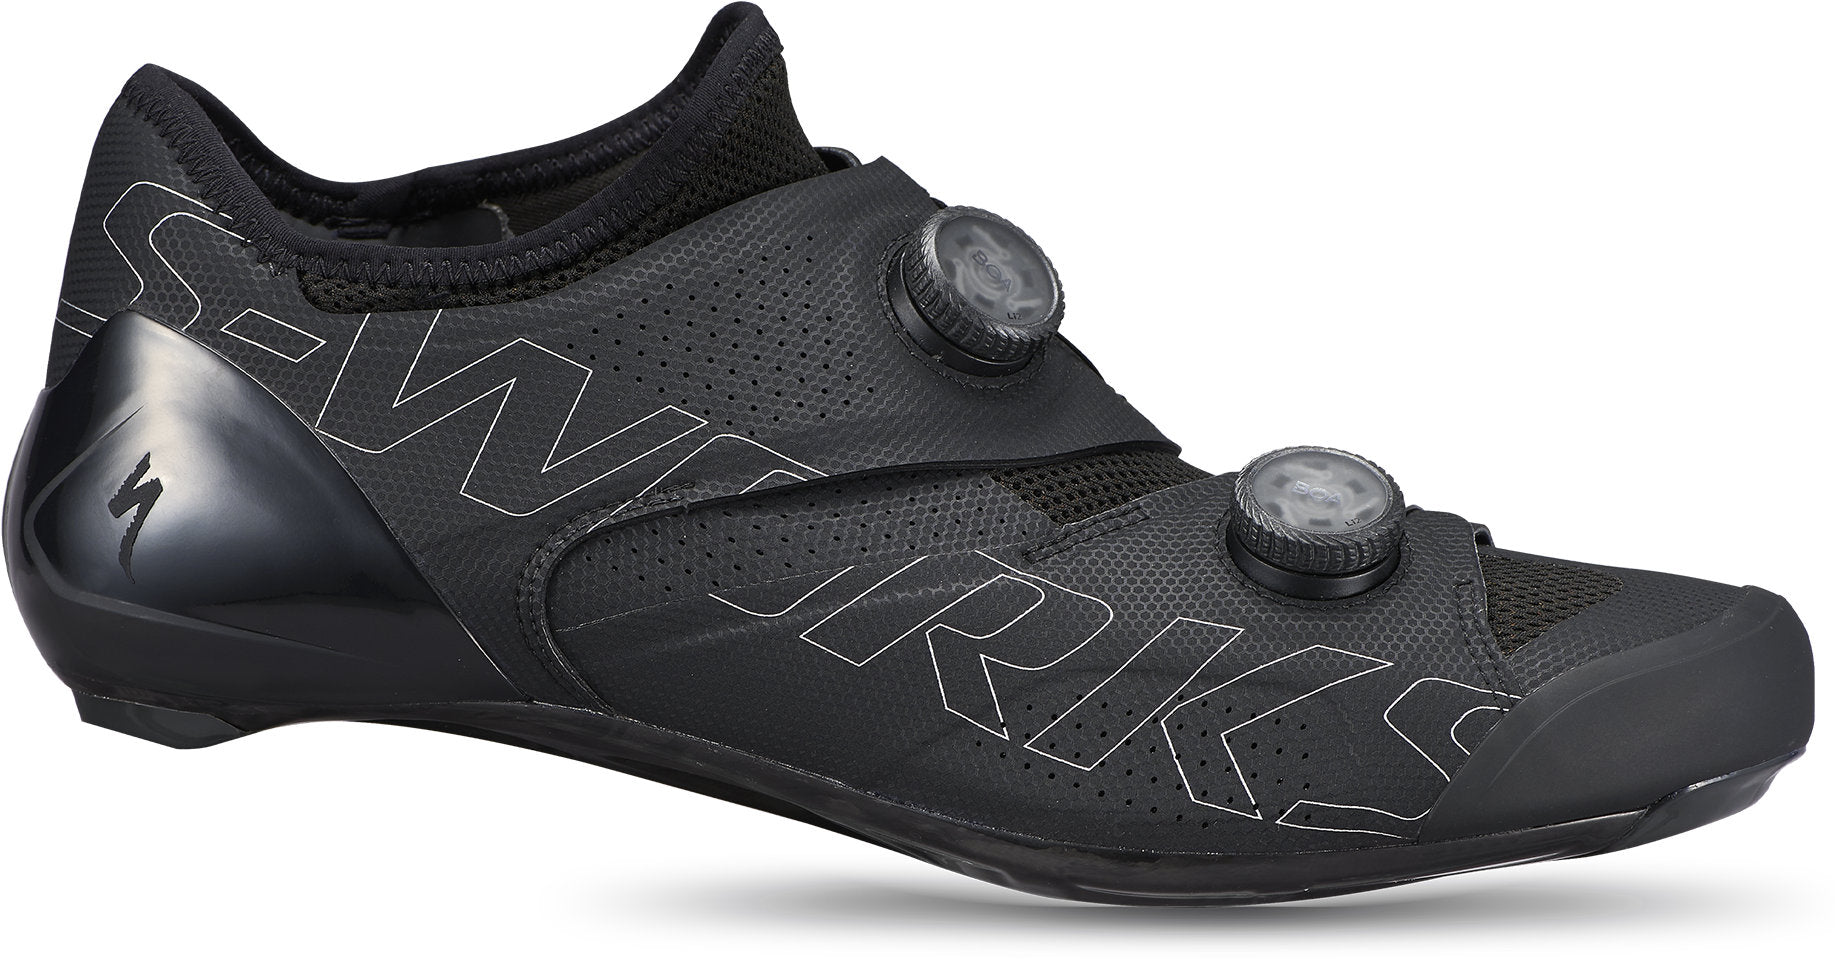 s-works shoes | Specialized Taiwan